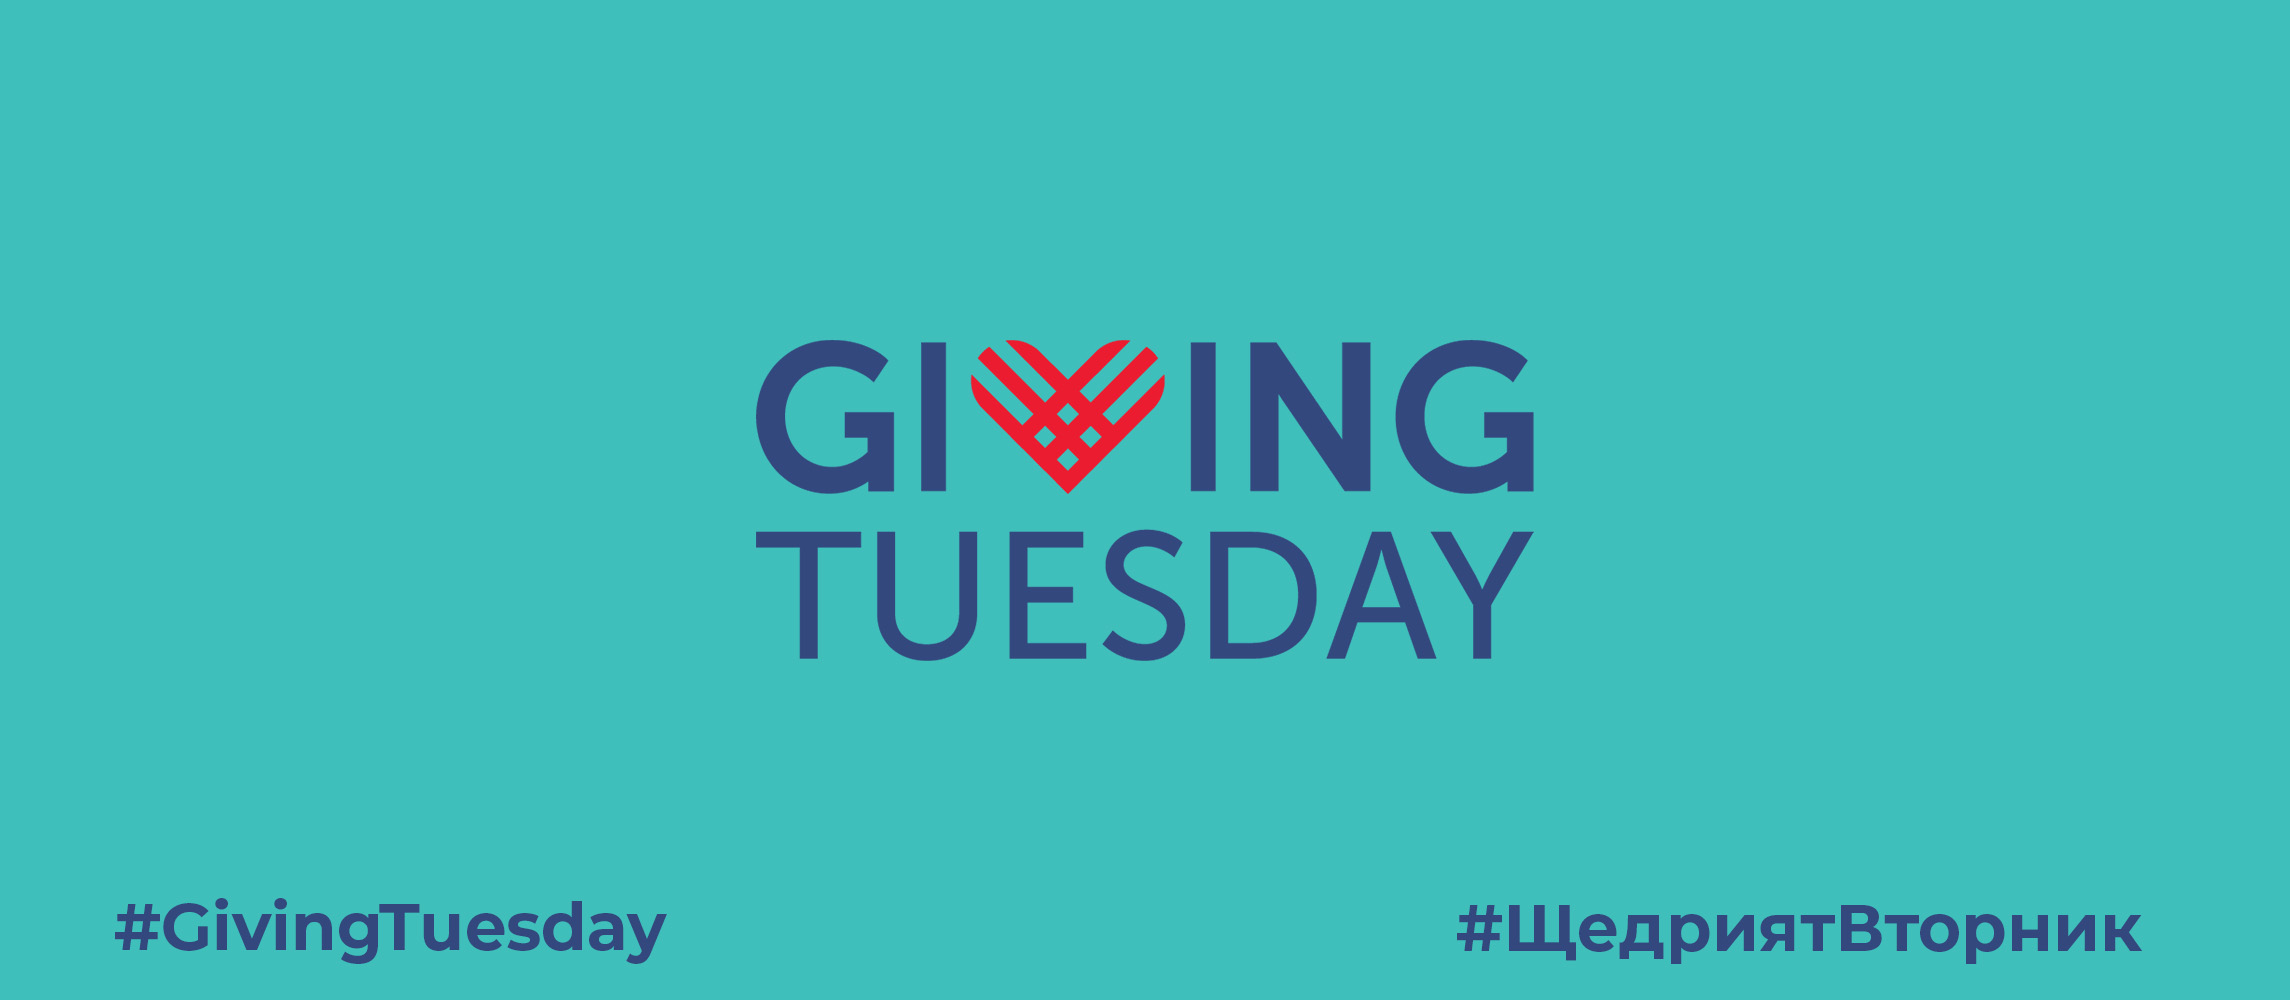 GivingTuesday and CasinoWow